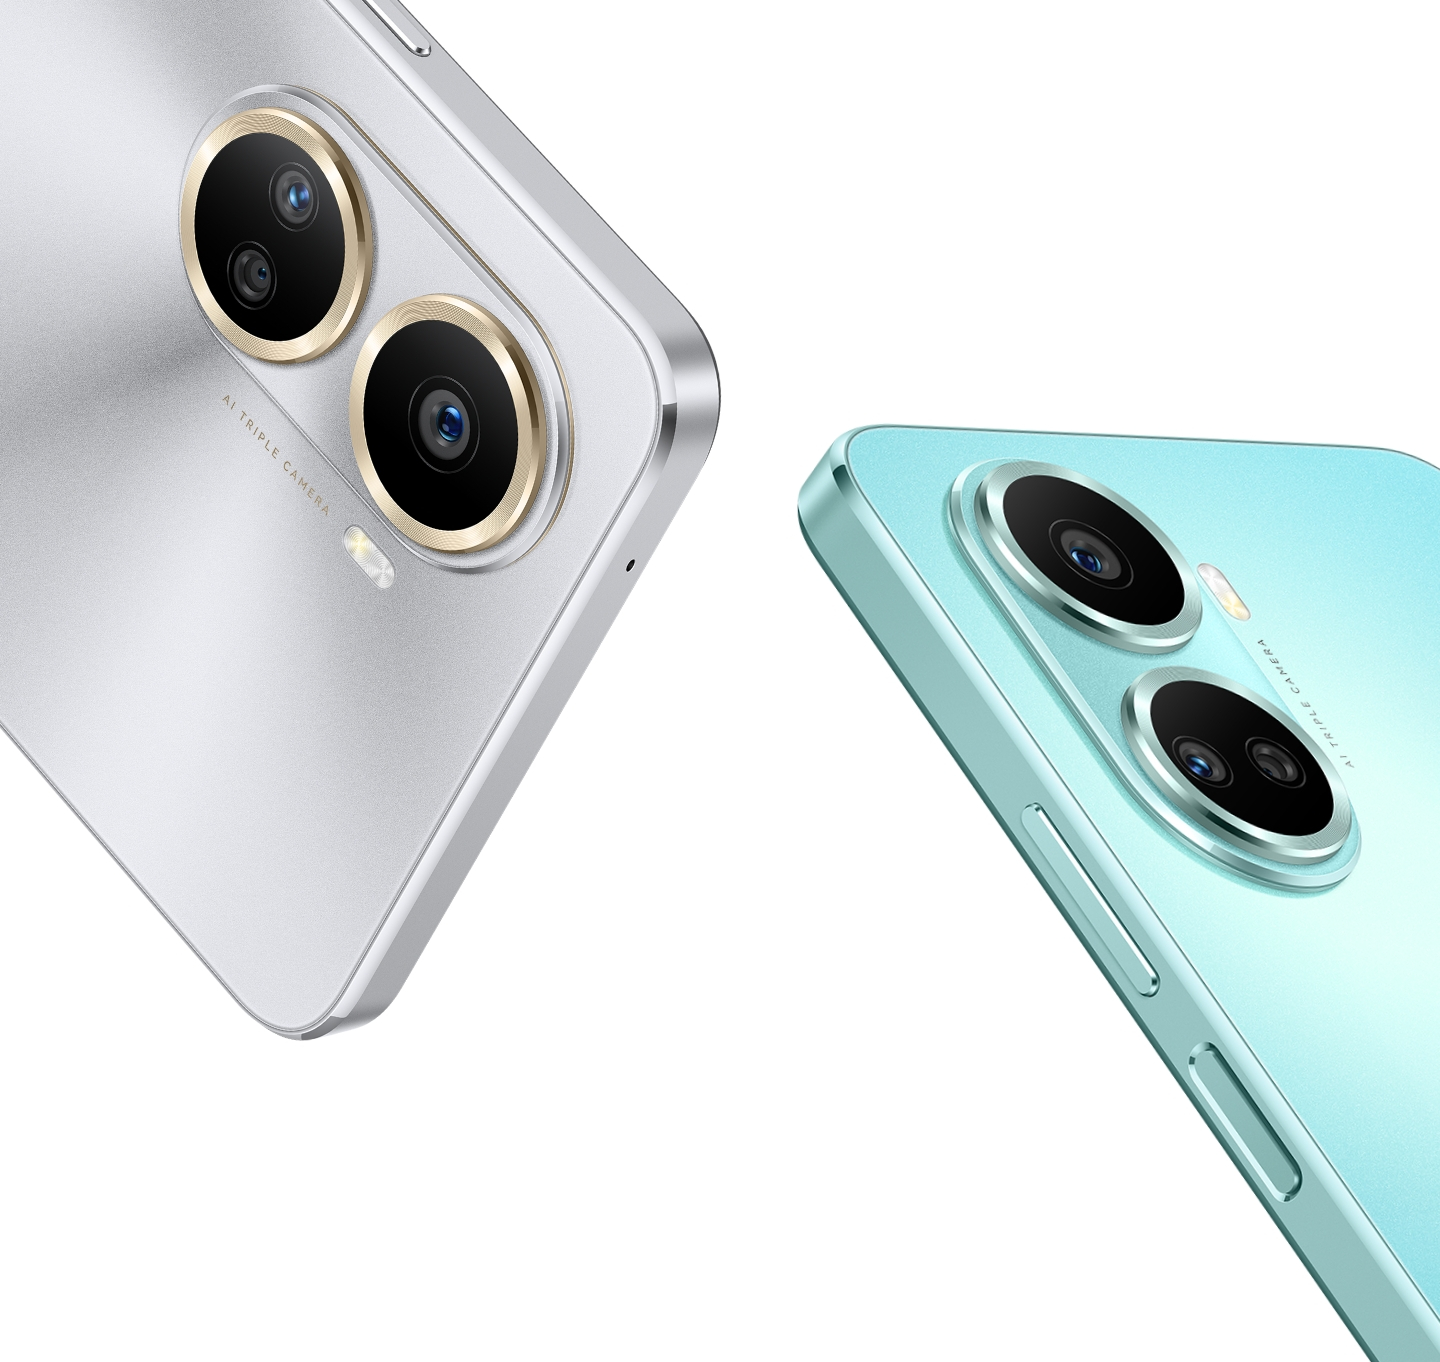 discretie Interactie legaal Huawei Nova 10 SE launches as a mid-range smartphone with 66 W fast  charging and a 108 MP triple camera array - NotebookCheck.net News